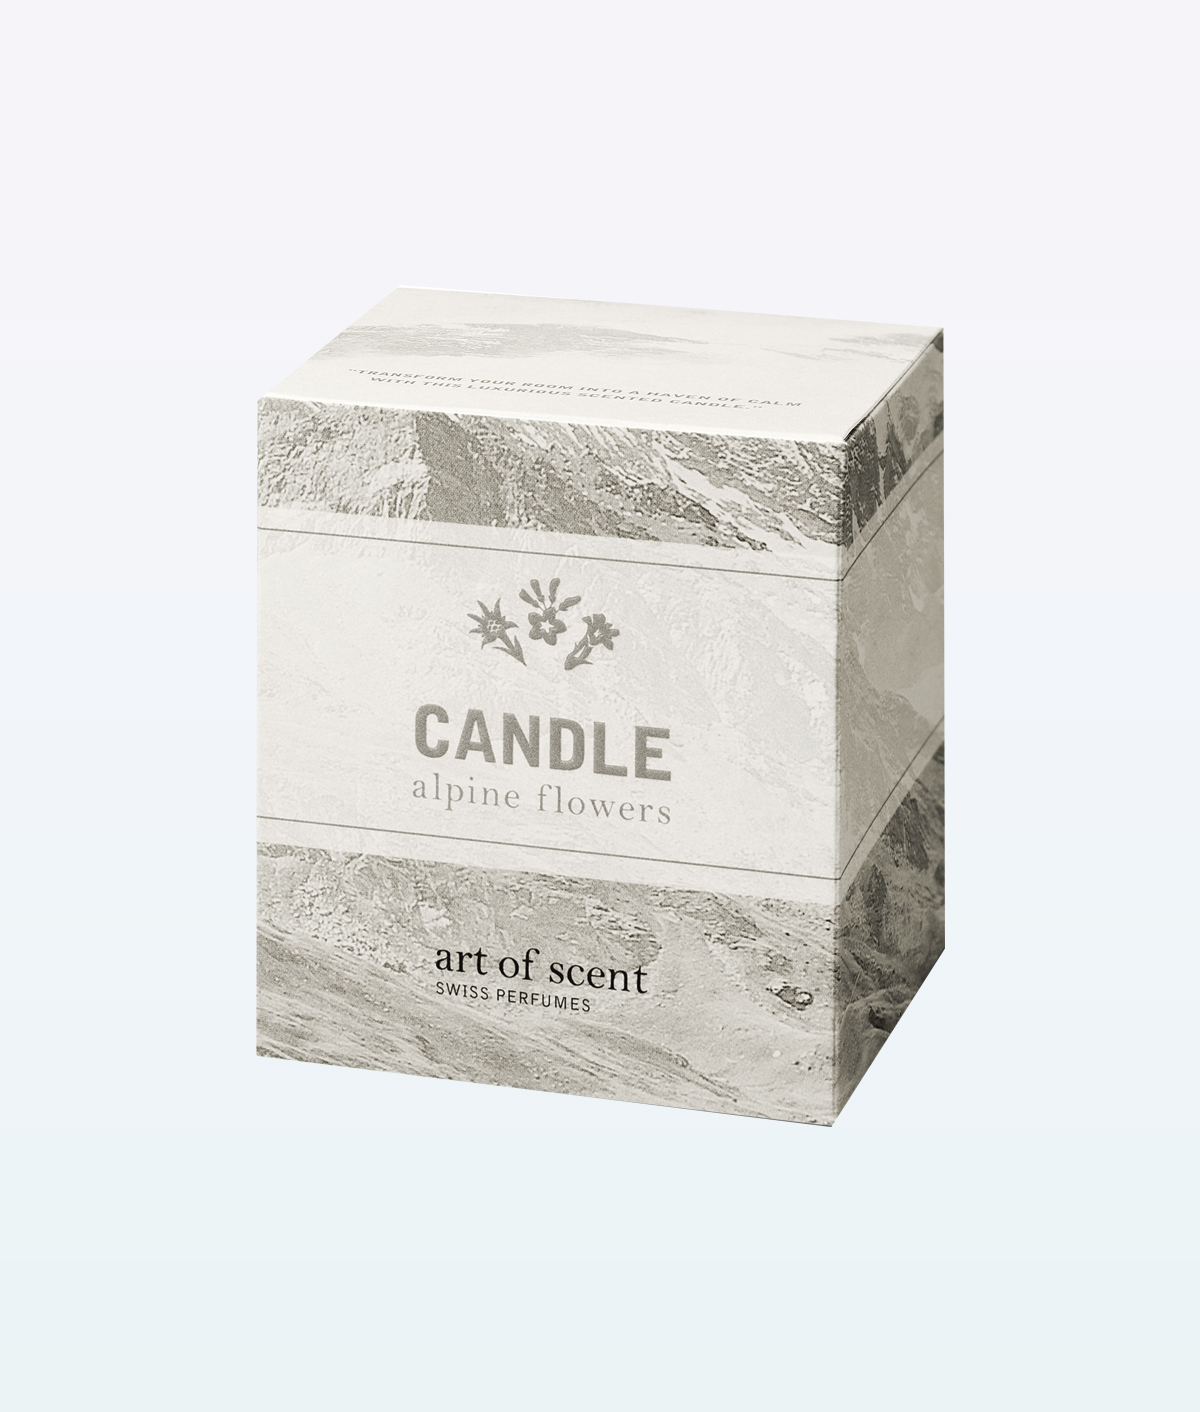 Bergduft Alpine Flowers Candle